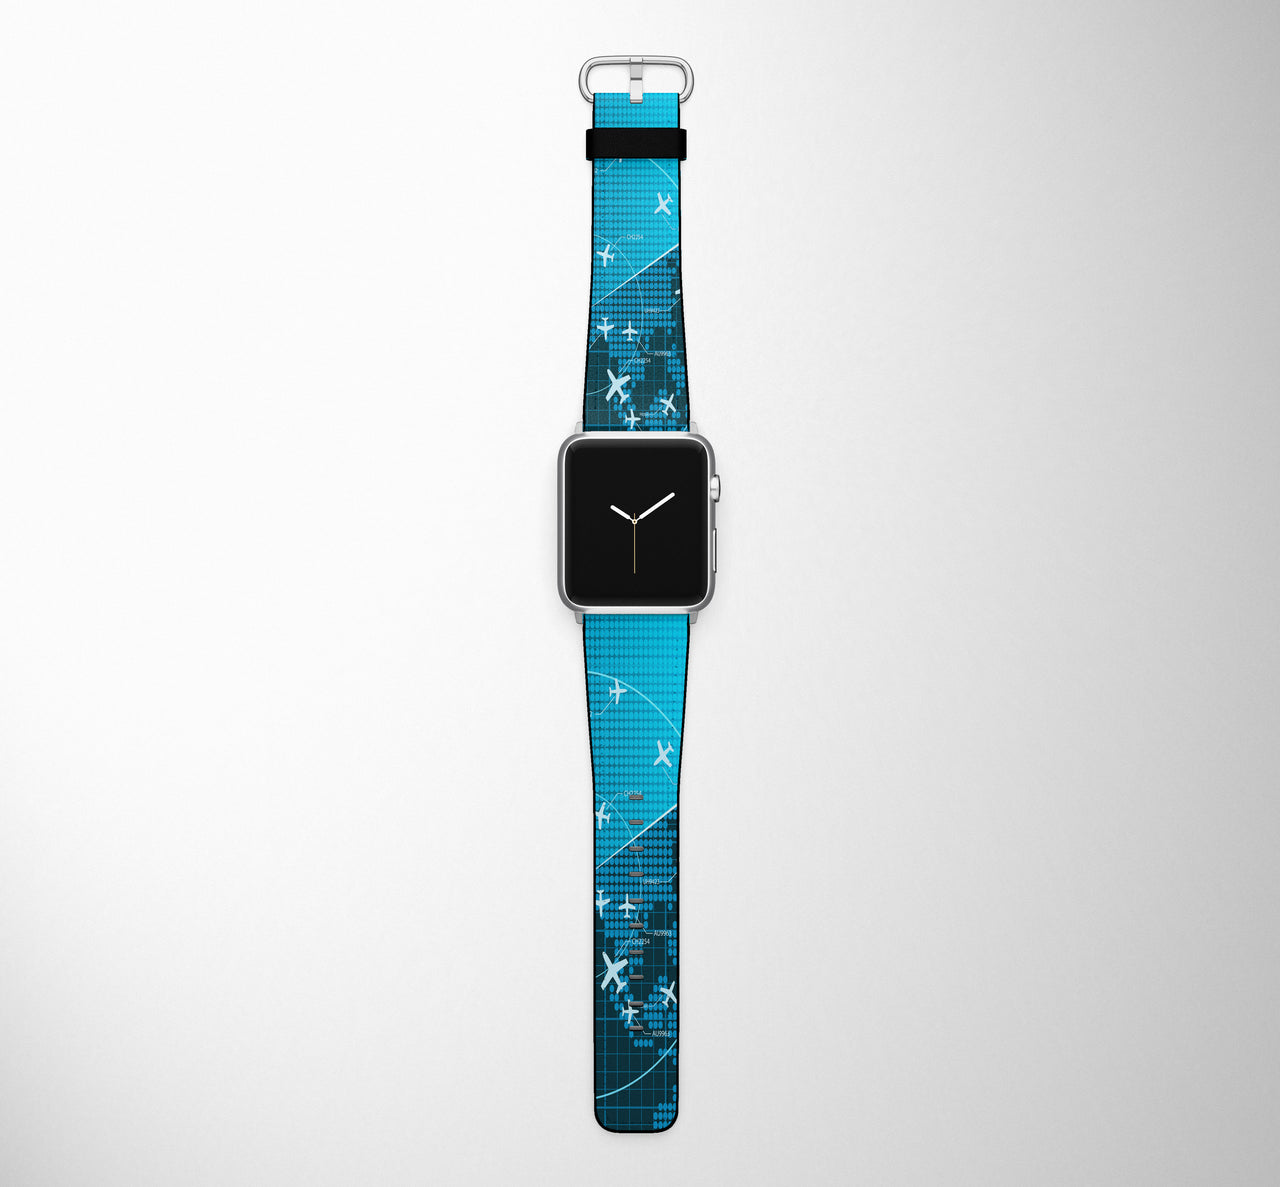 Air Traffic Control Screen Designed Leather Apple Watch Straps